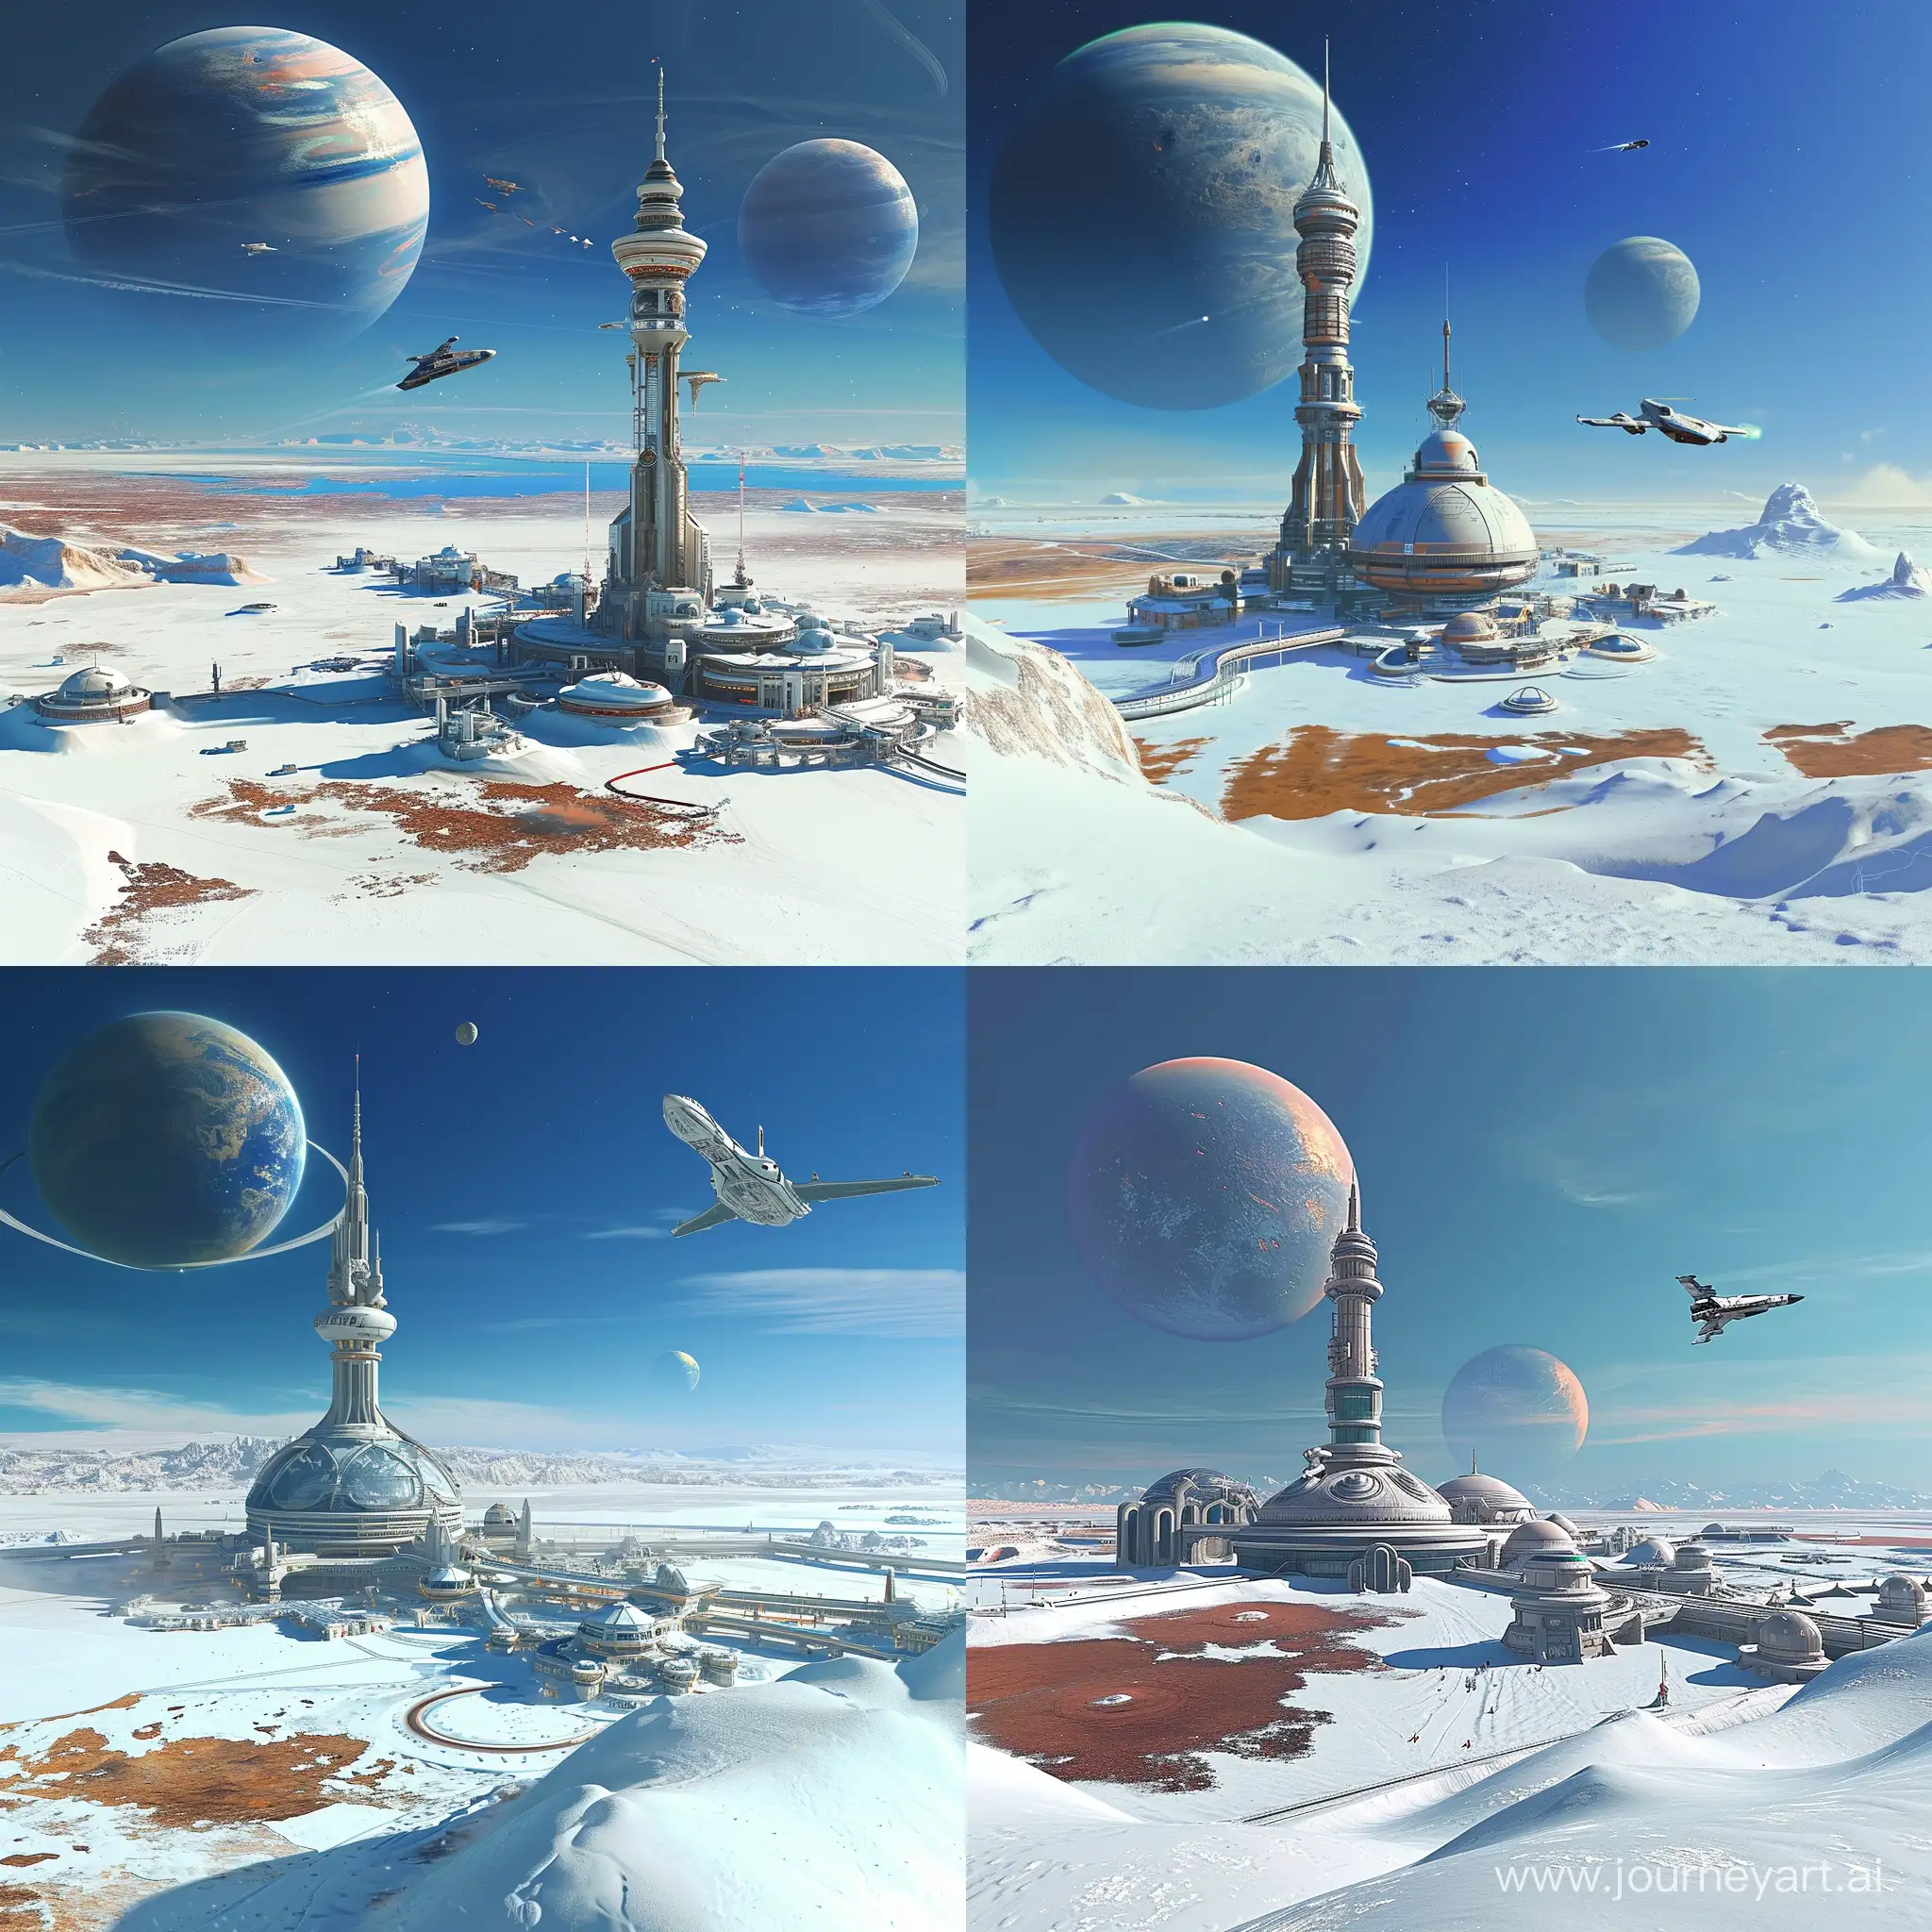 Futuristic-Snowy-Space-Station-with-Tower-and-Spaceship